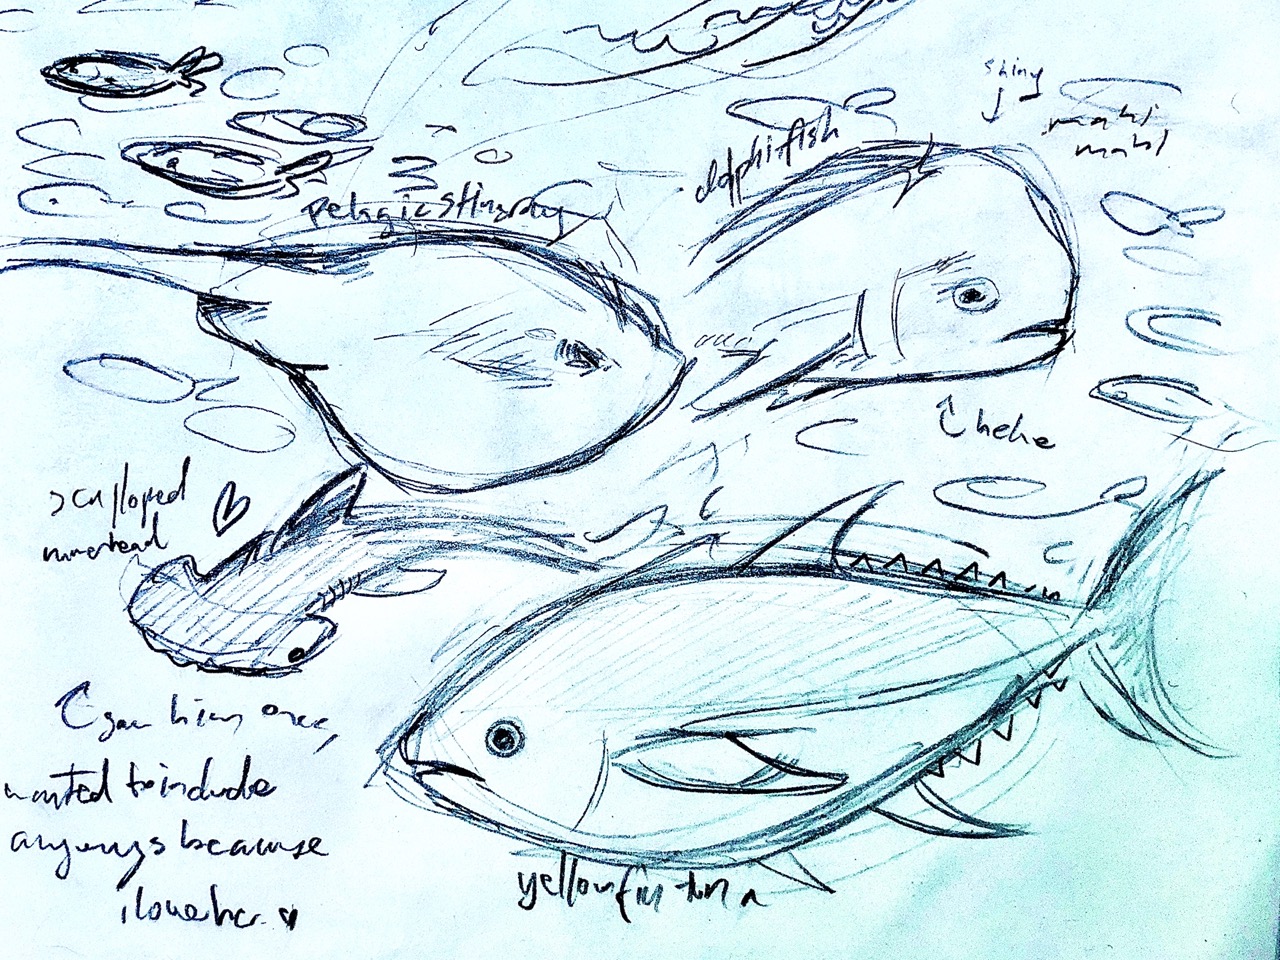 a pelagic stingray, dolphinfish, and yellowfin tuna, with a hammerhead and a school of sardines in the background. this sketch is tinted a pale blue.